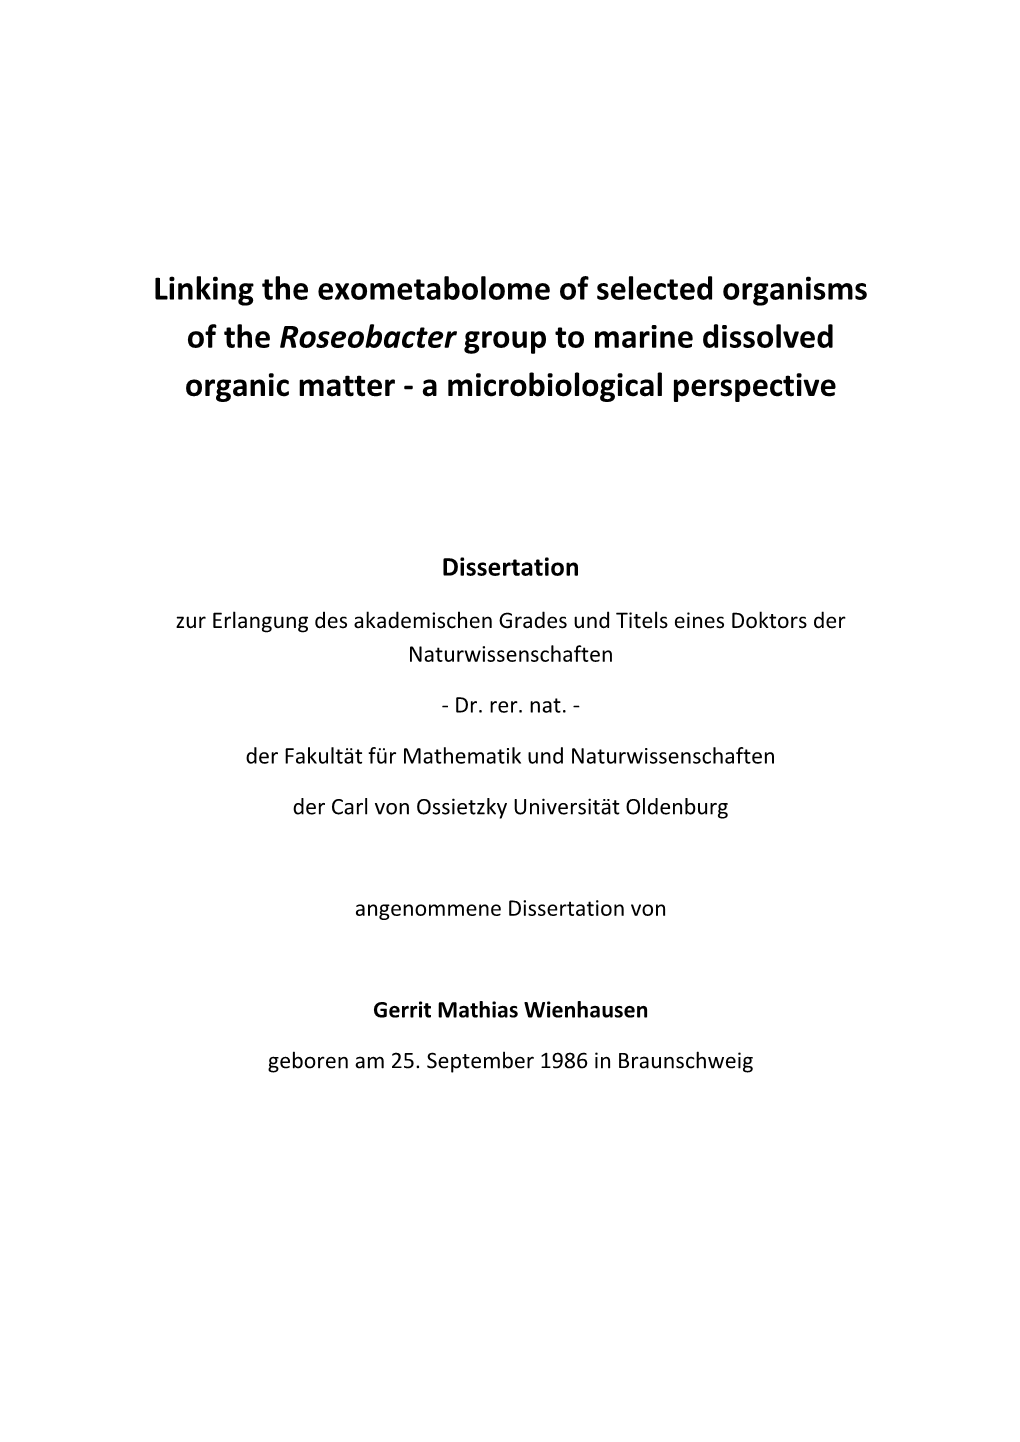 Linking the Exometabolome of Selected Organisms of the Roseobacter Group to Marine Dissolved Organic Matter - a Microbiological Perspective